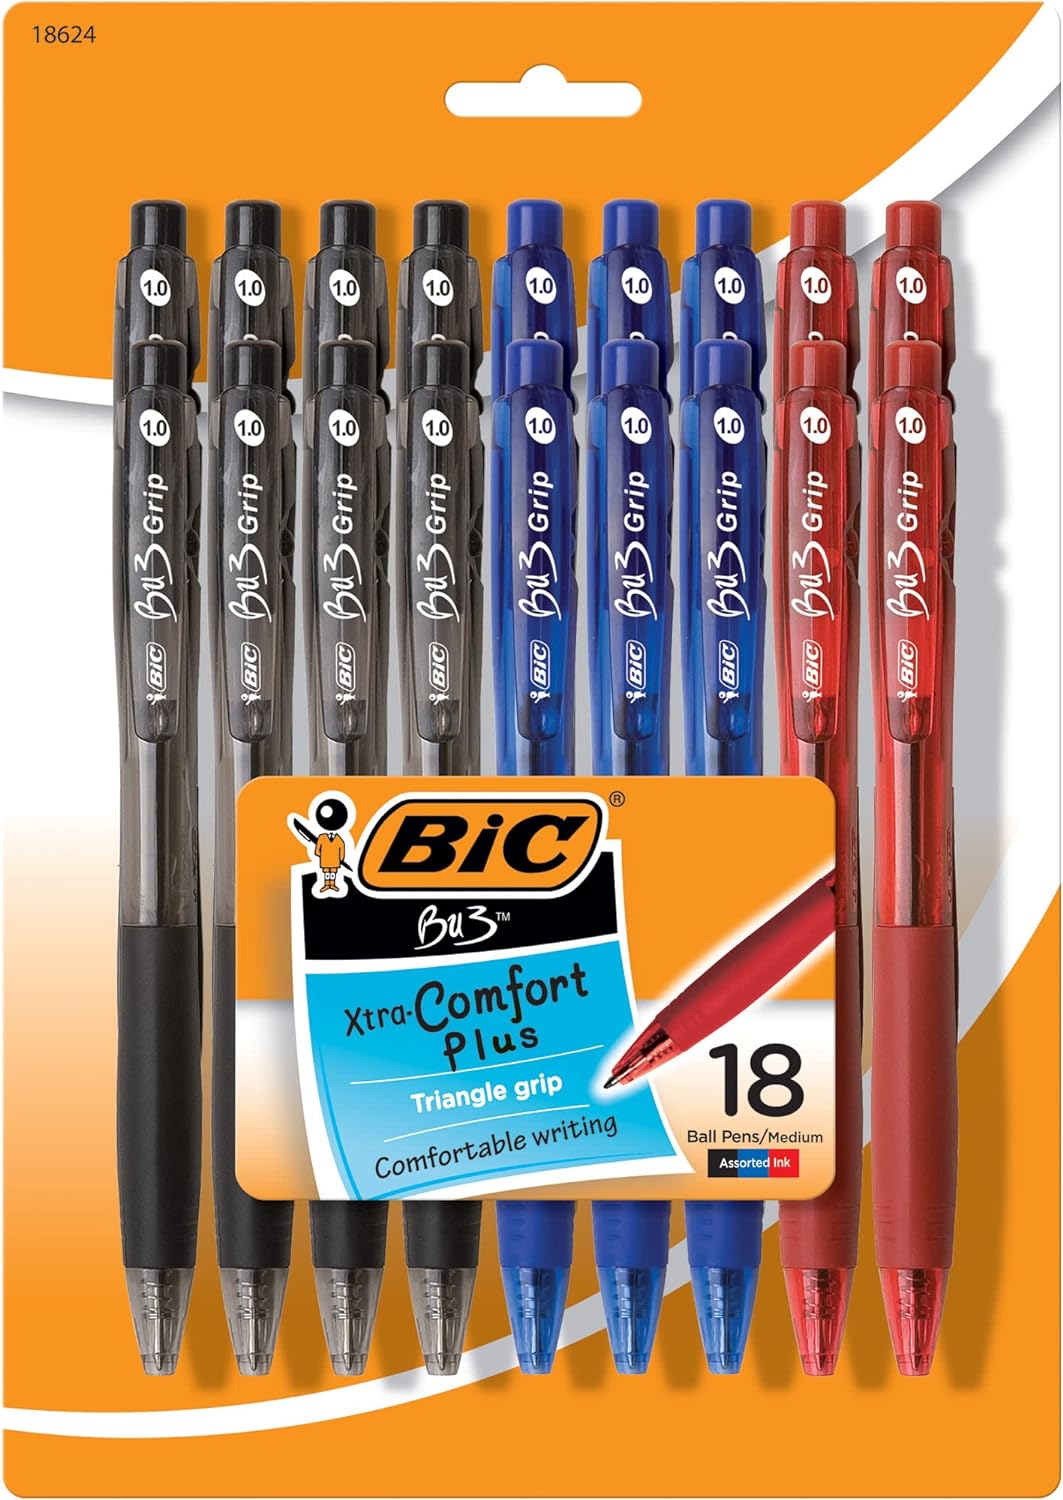 BIC BU3 Grip Retractable Ball Pen, Medium Point (1.0mm), Black, Comfortable Grip for Smooth Writing, 18-Count